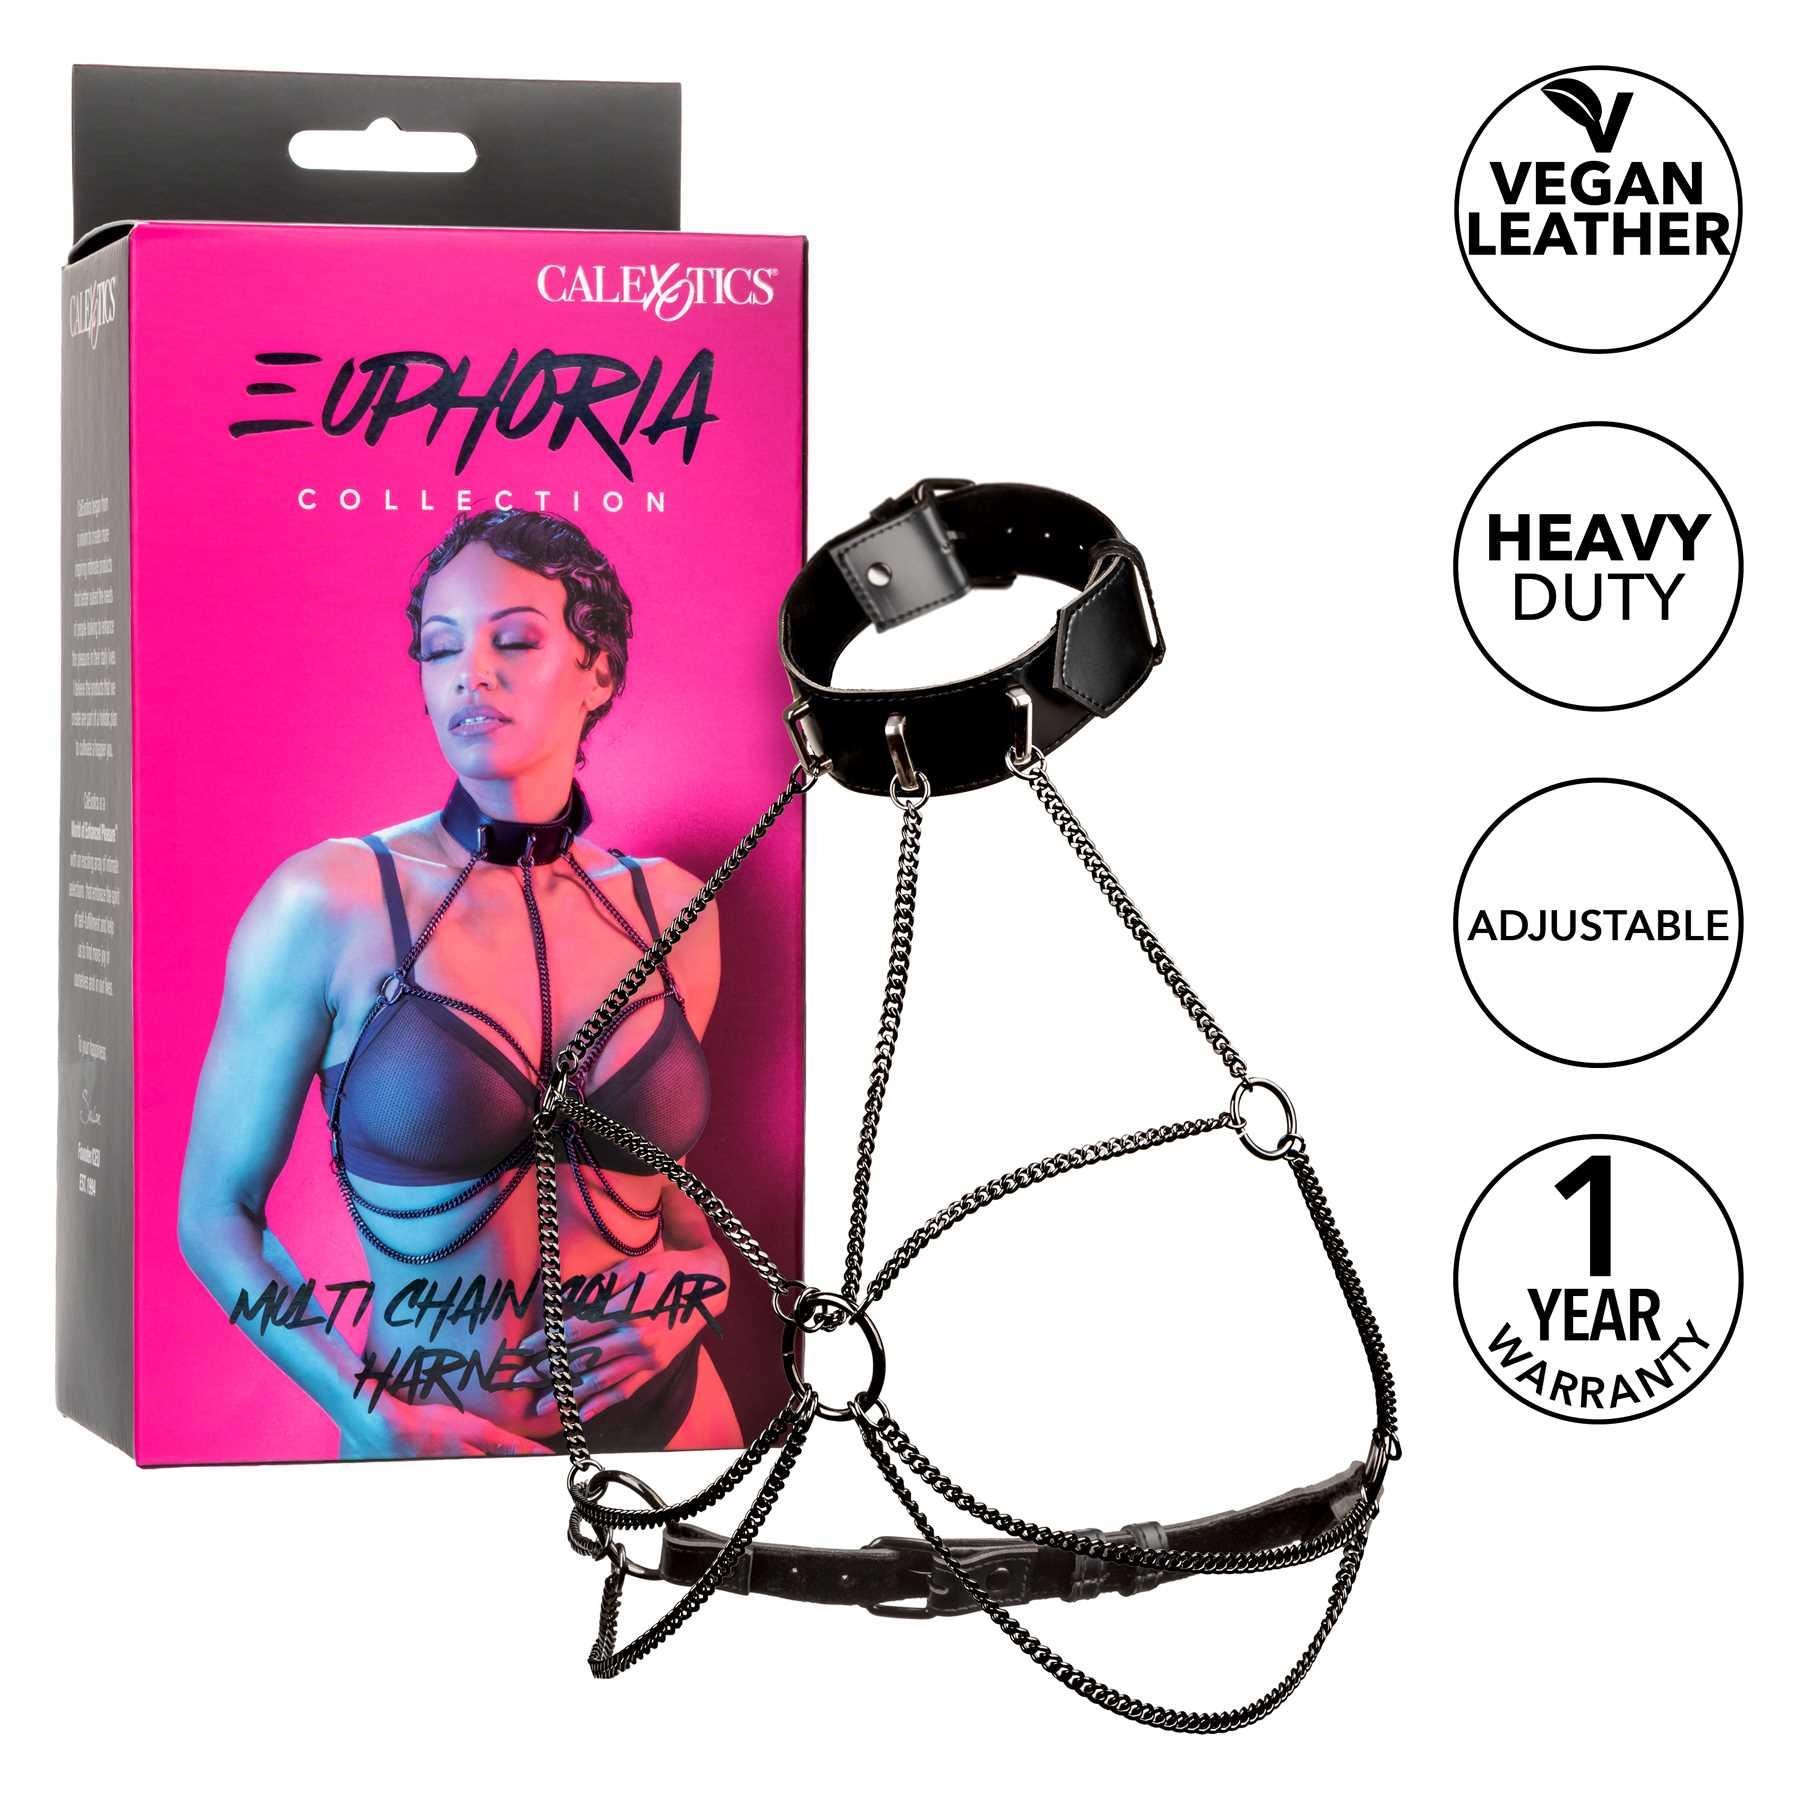 EUPHORIA COLLECTION MLT CHAIN CLR HARNESS